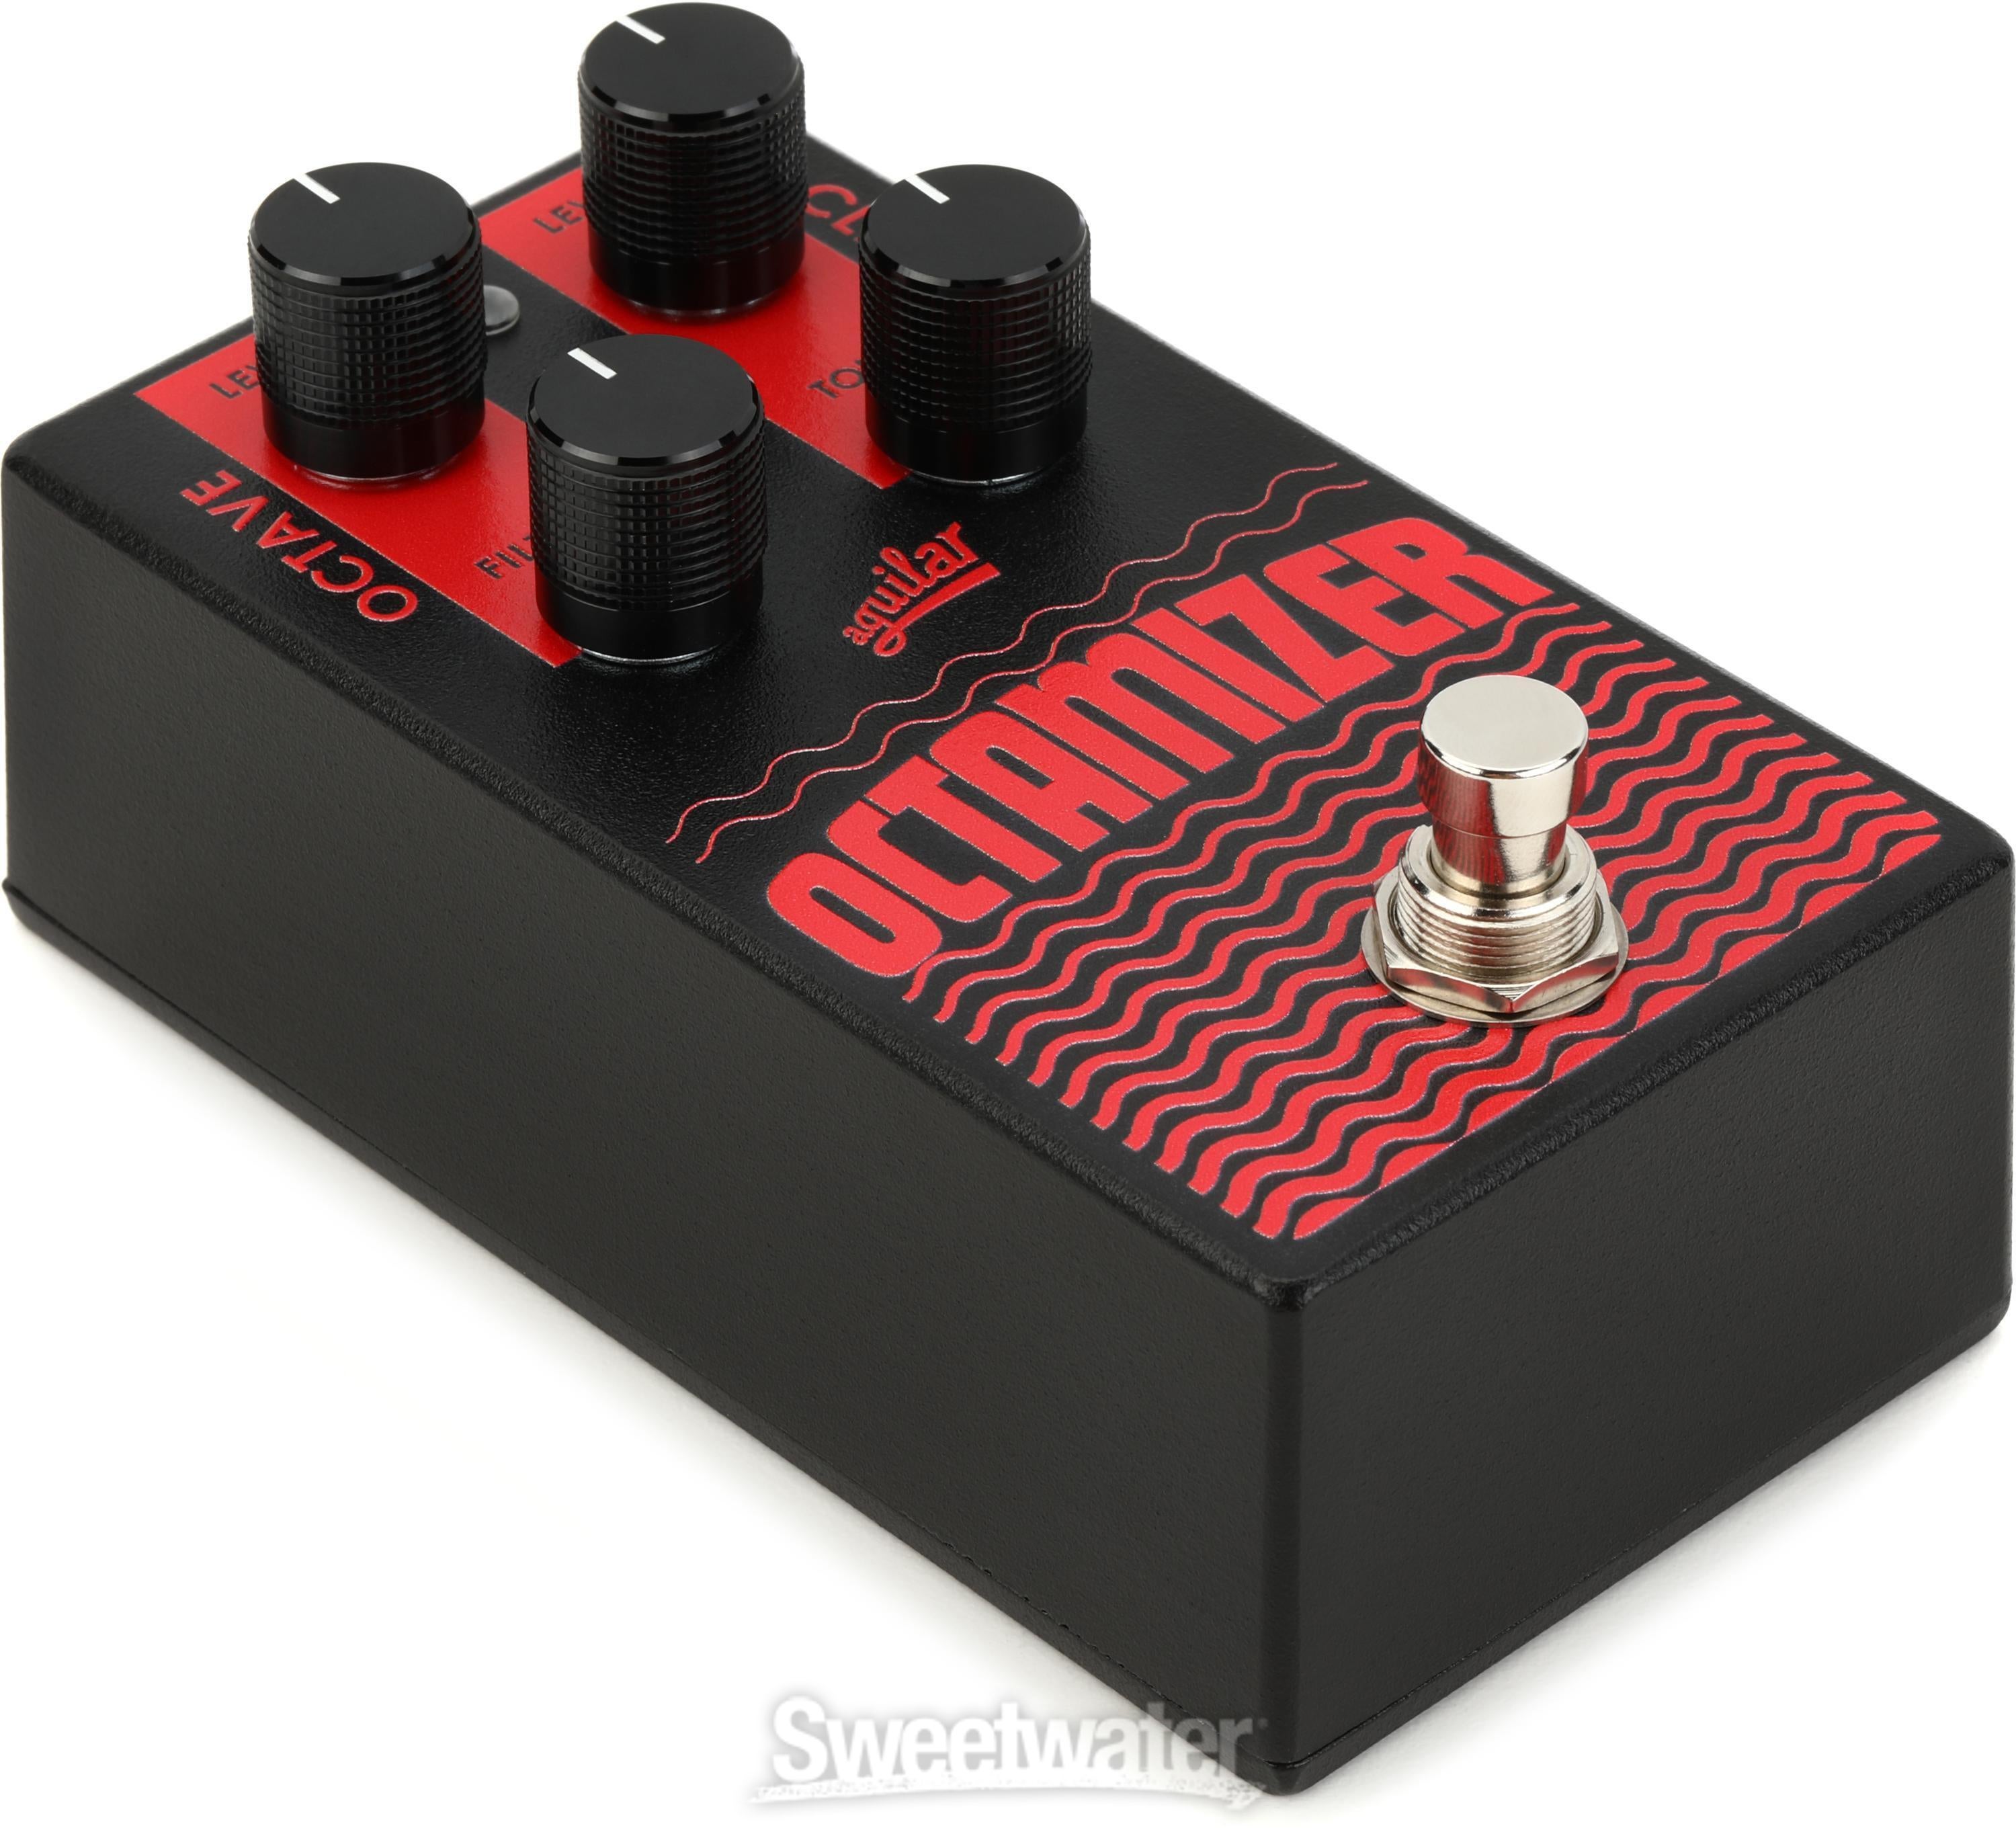 Aguilar Octamizer V2 Analog Bass Octave Pedal | Sweetwater